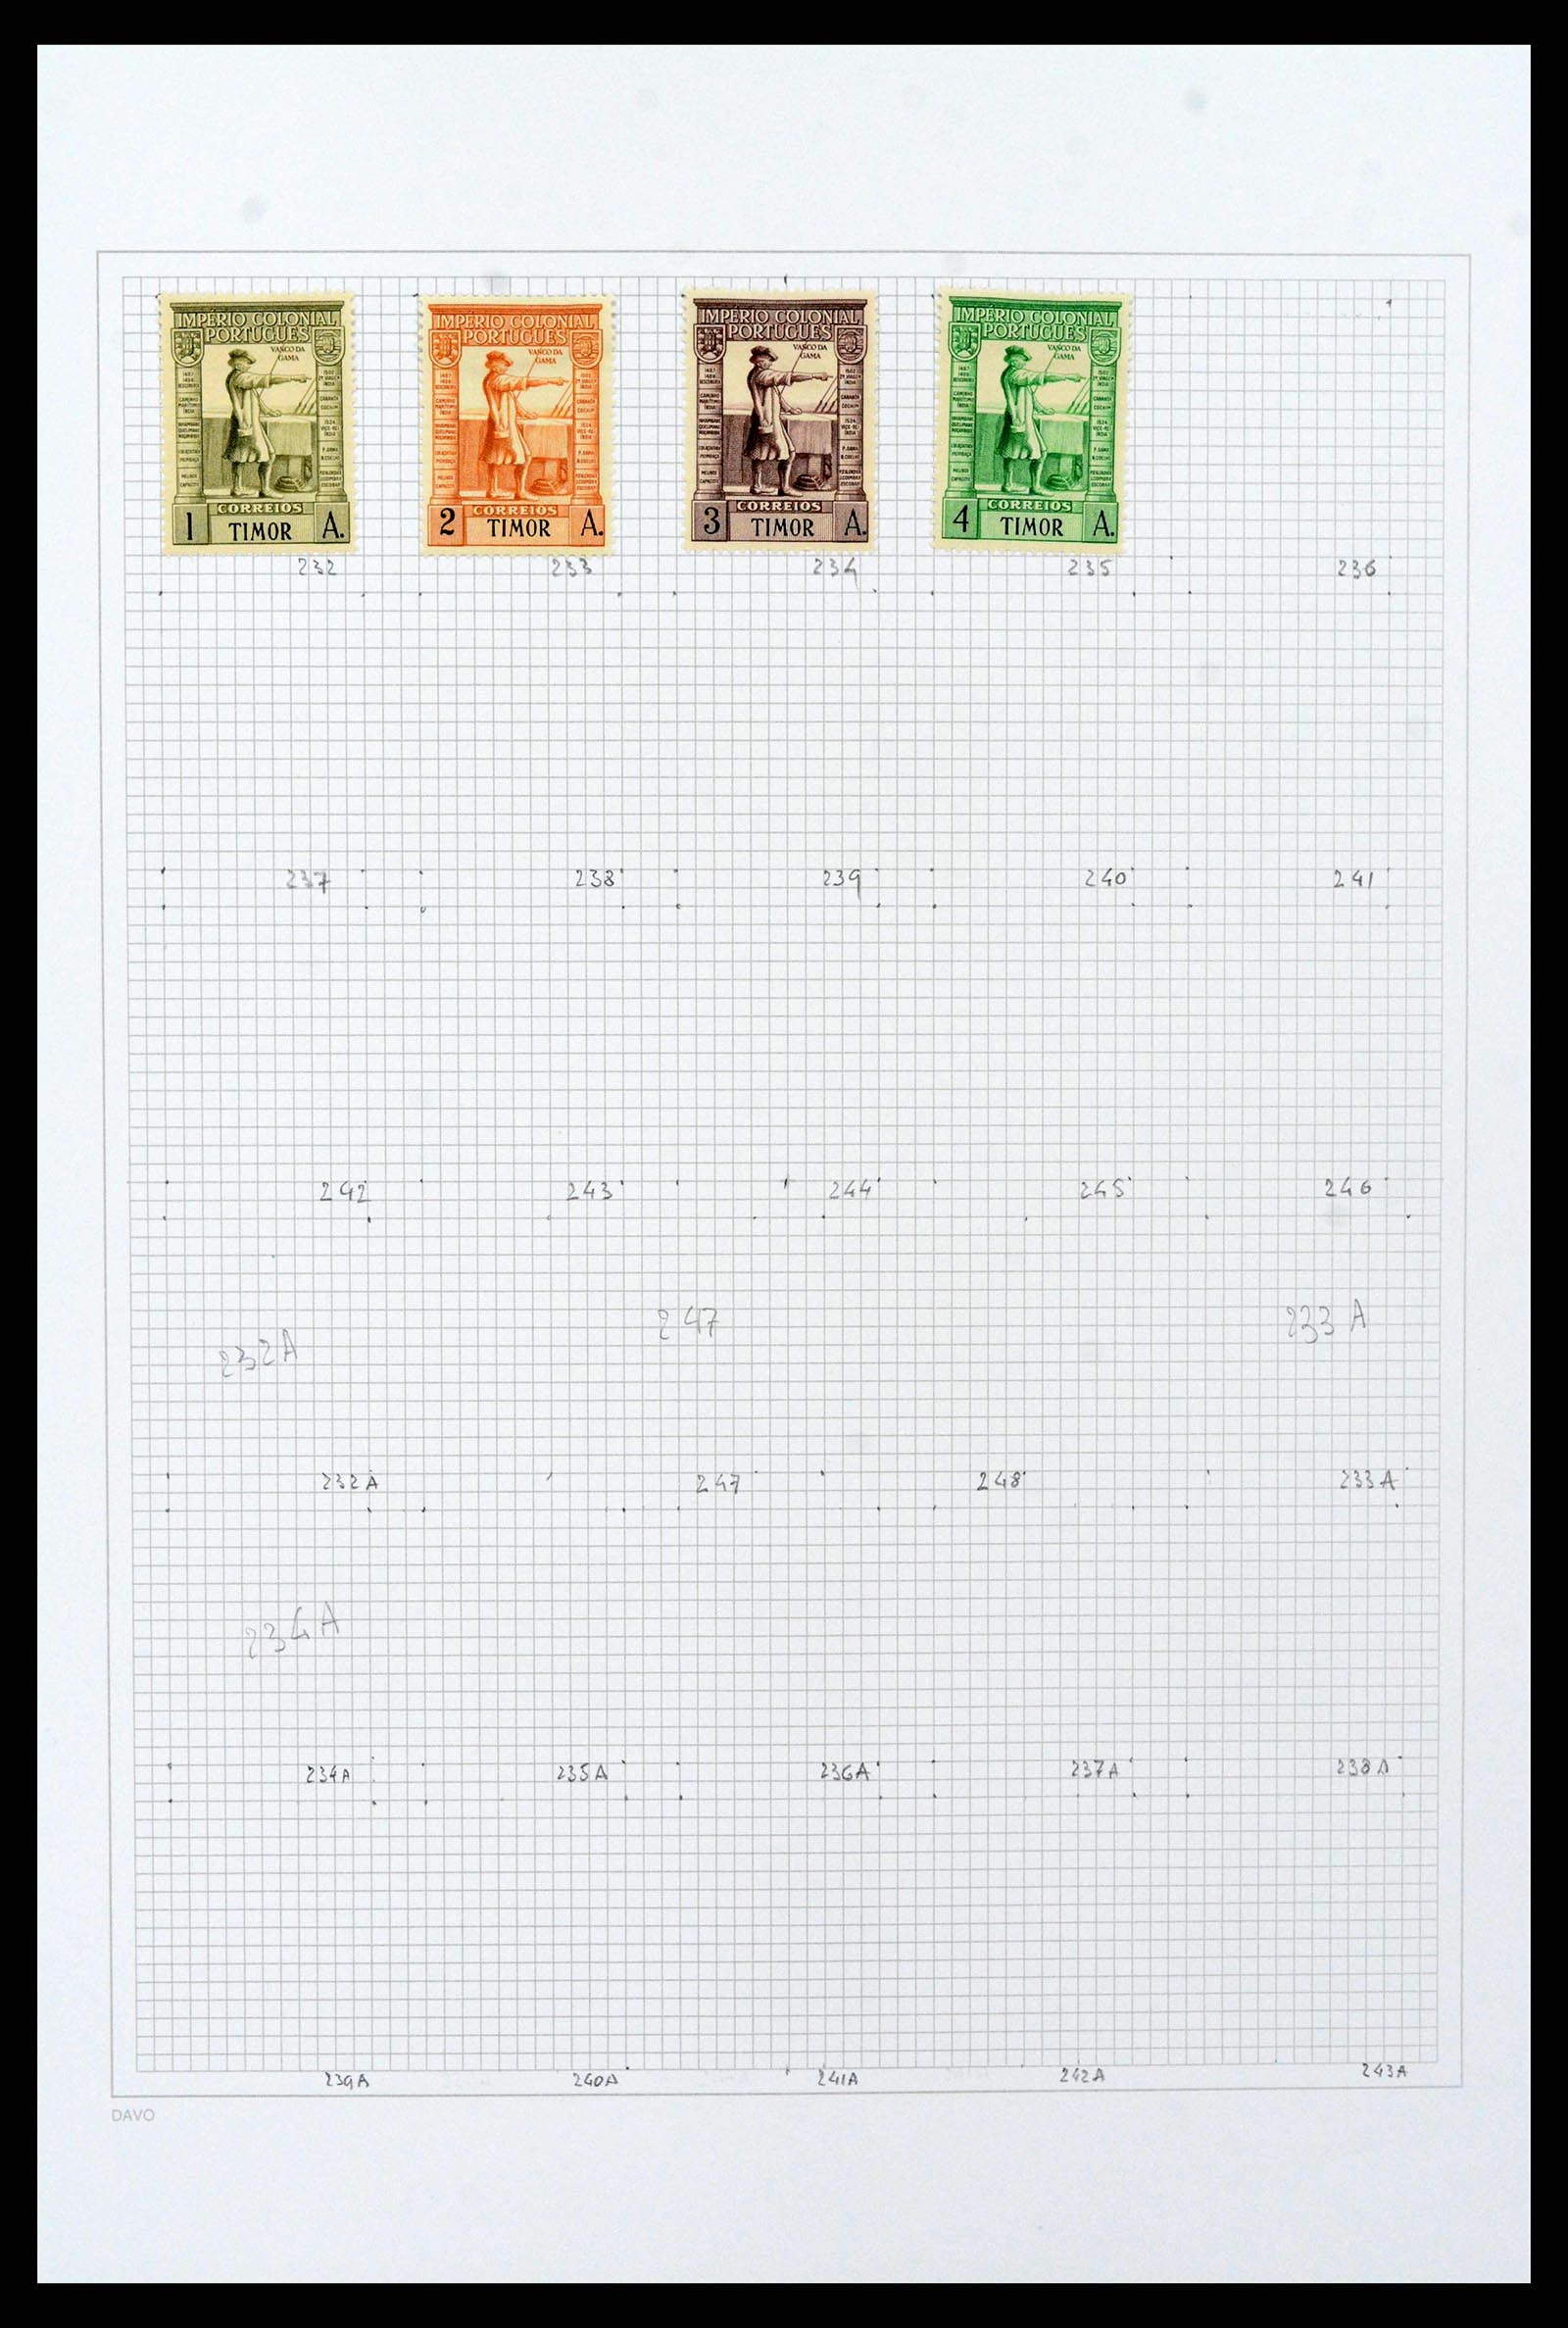 38154 0206 - Stamp collection 38154 Portuguese colonies 1880-1999.